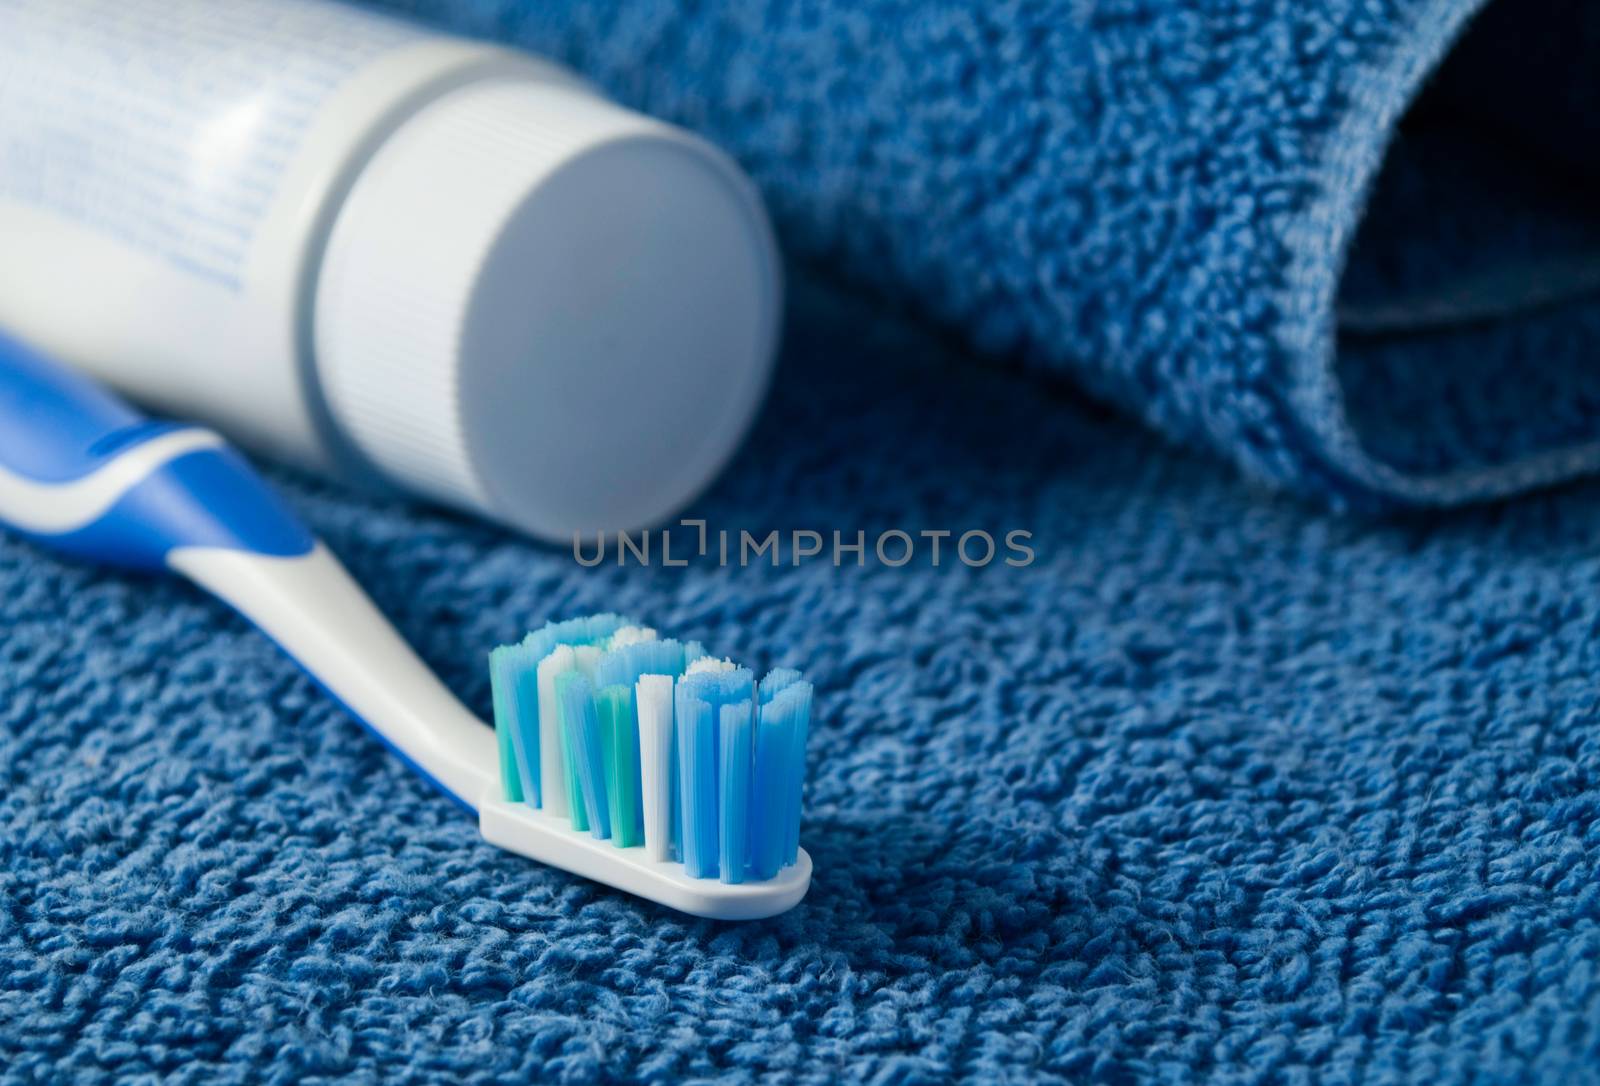 Toothbrush and toothpaste lie on a towel..